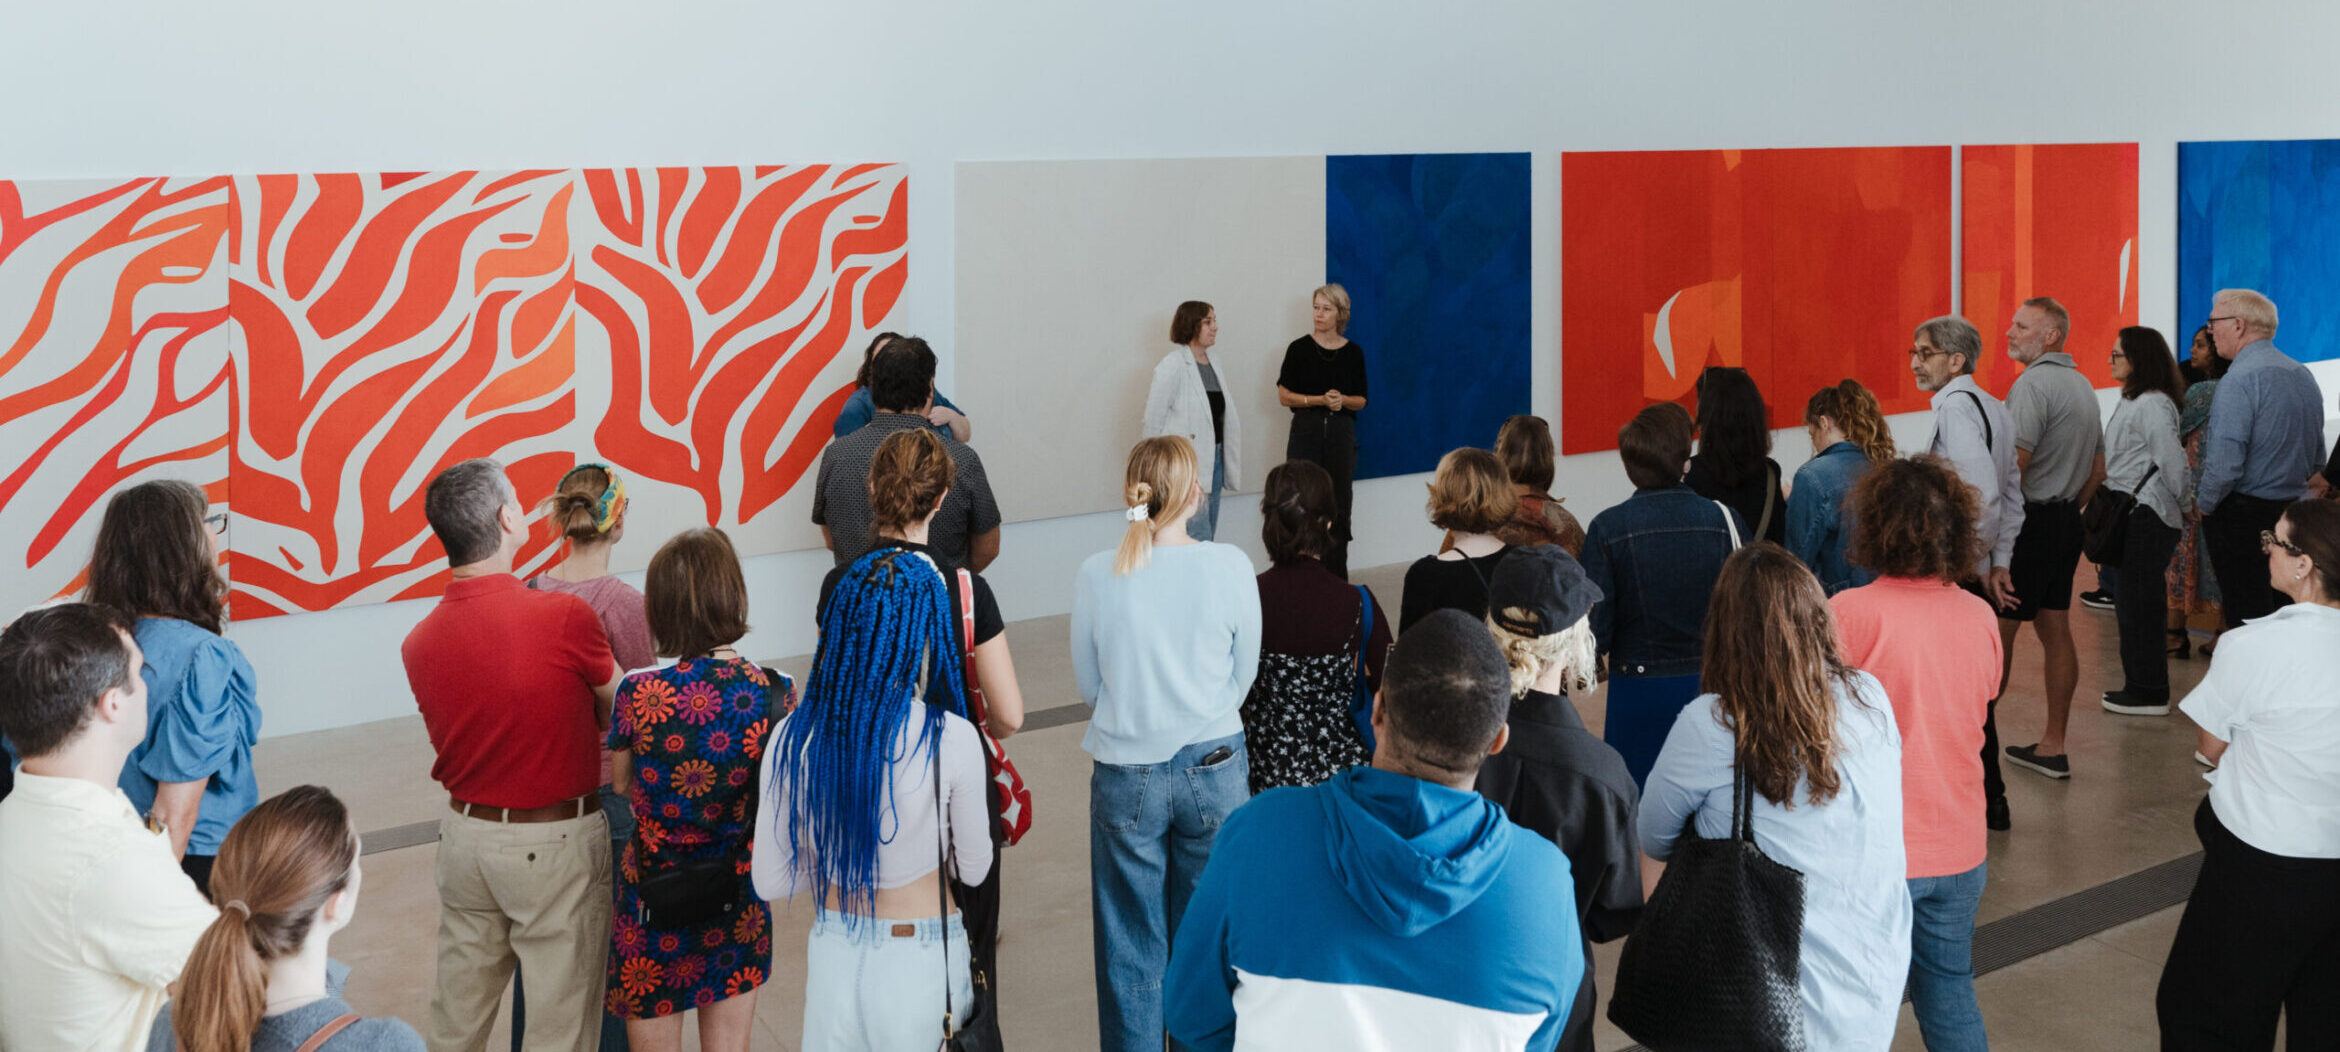 Visitors gathering for a tour of "Sarah Crowner: Around Orange" at the Pulitzer Arts Foundation.